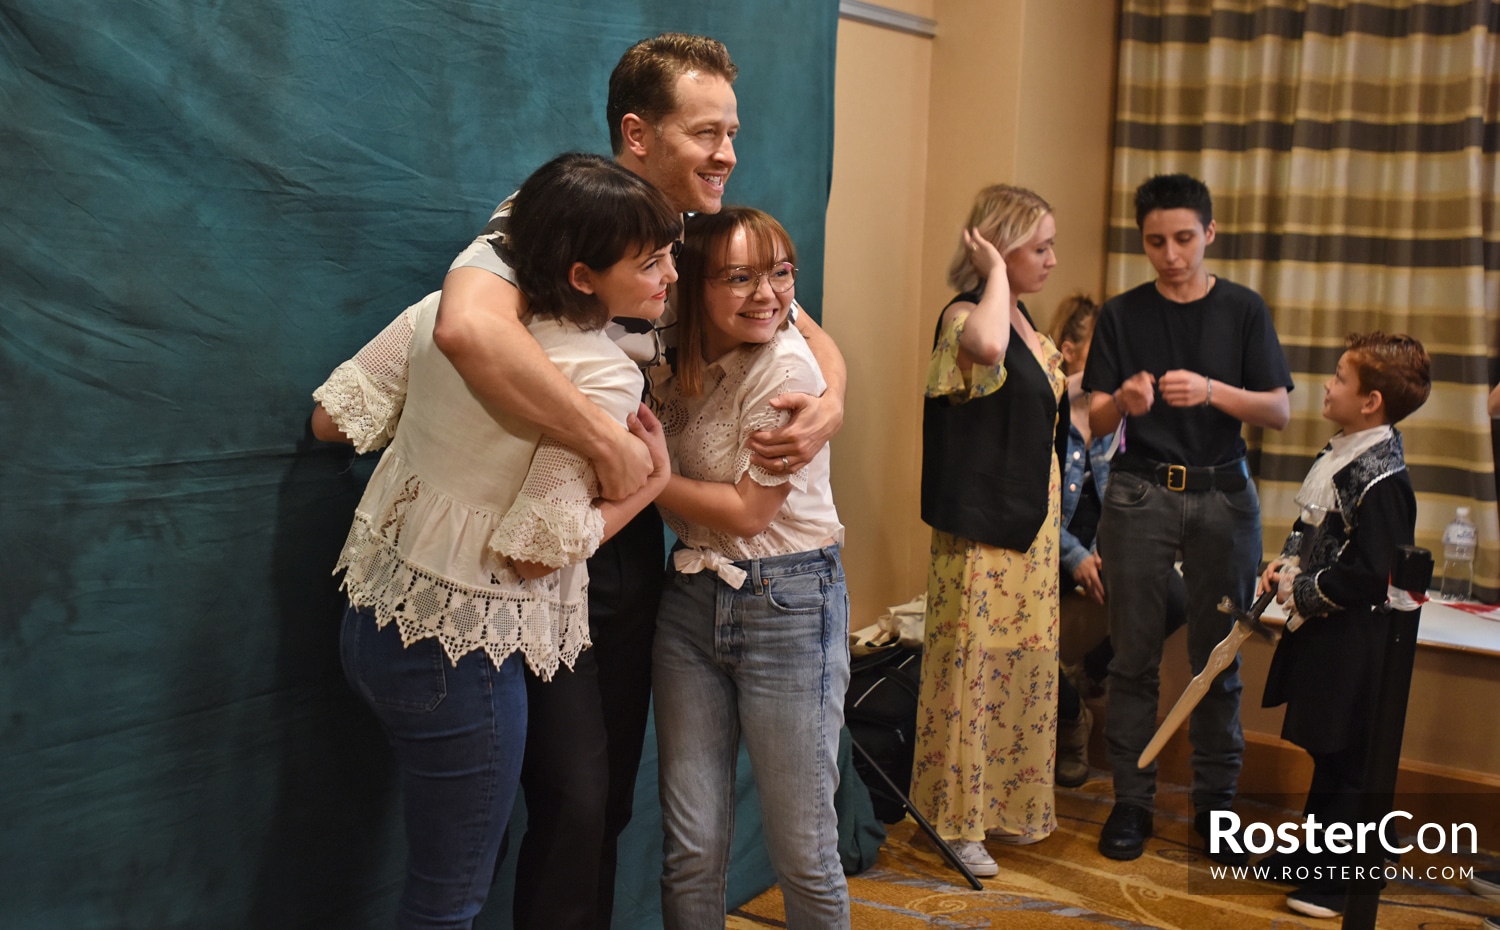 Ginnifer Goodwin & Josh Dallas - The Happy Ending Convention 3 - Once Upon A Time